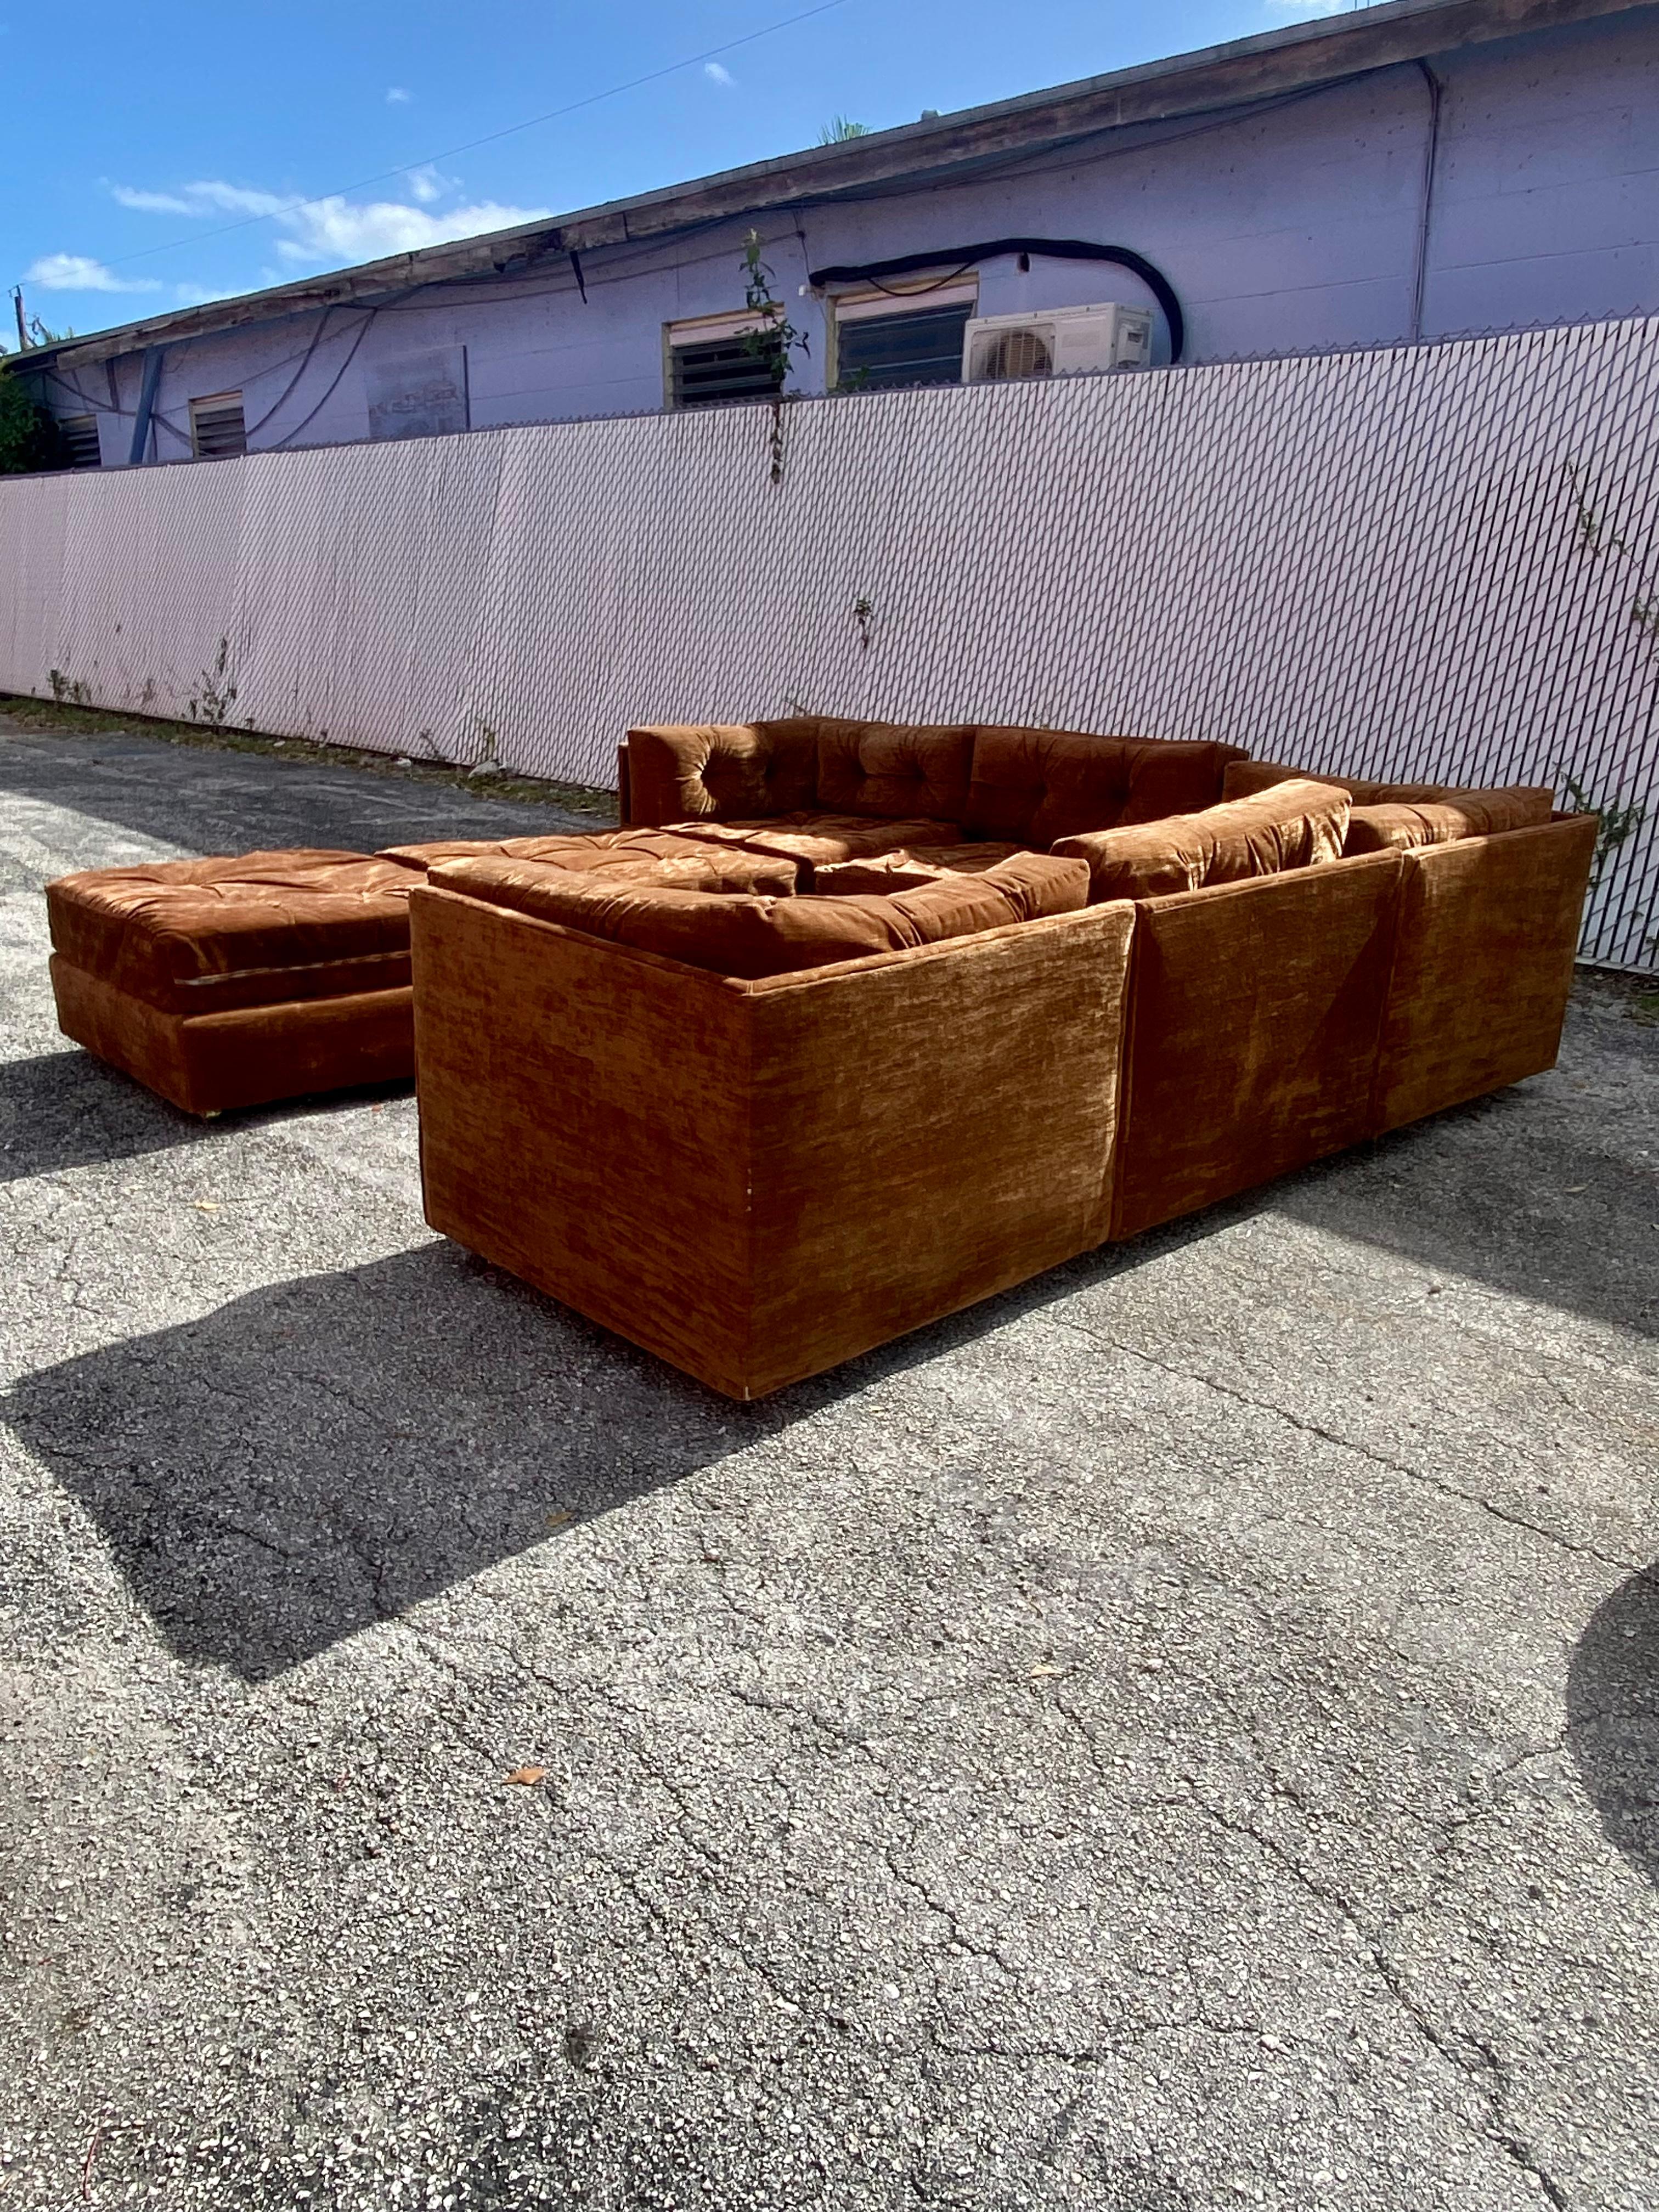 On offer on this occasion is one of the most stunning, modular sectional you could hope to find. This is a rare opportunity to acquire what is, unequivocally, the best of the best, it being a most spectacular and beautifully-presented in original